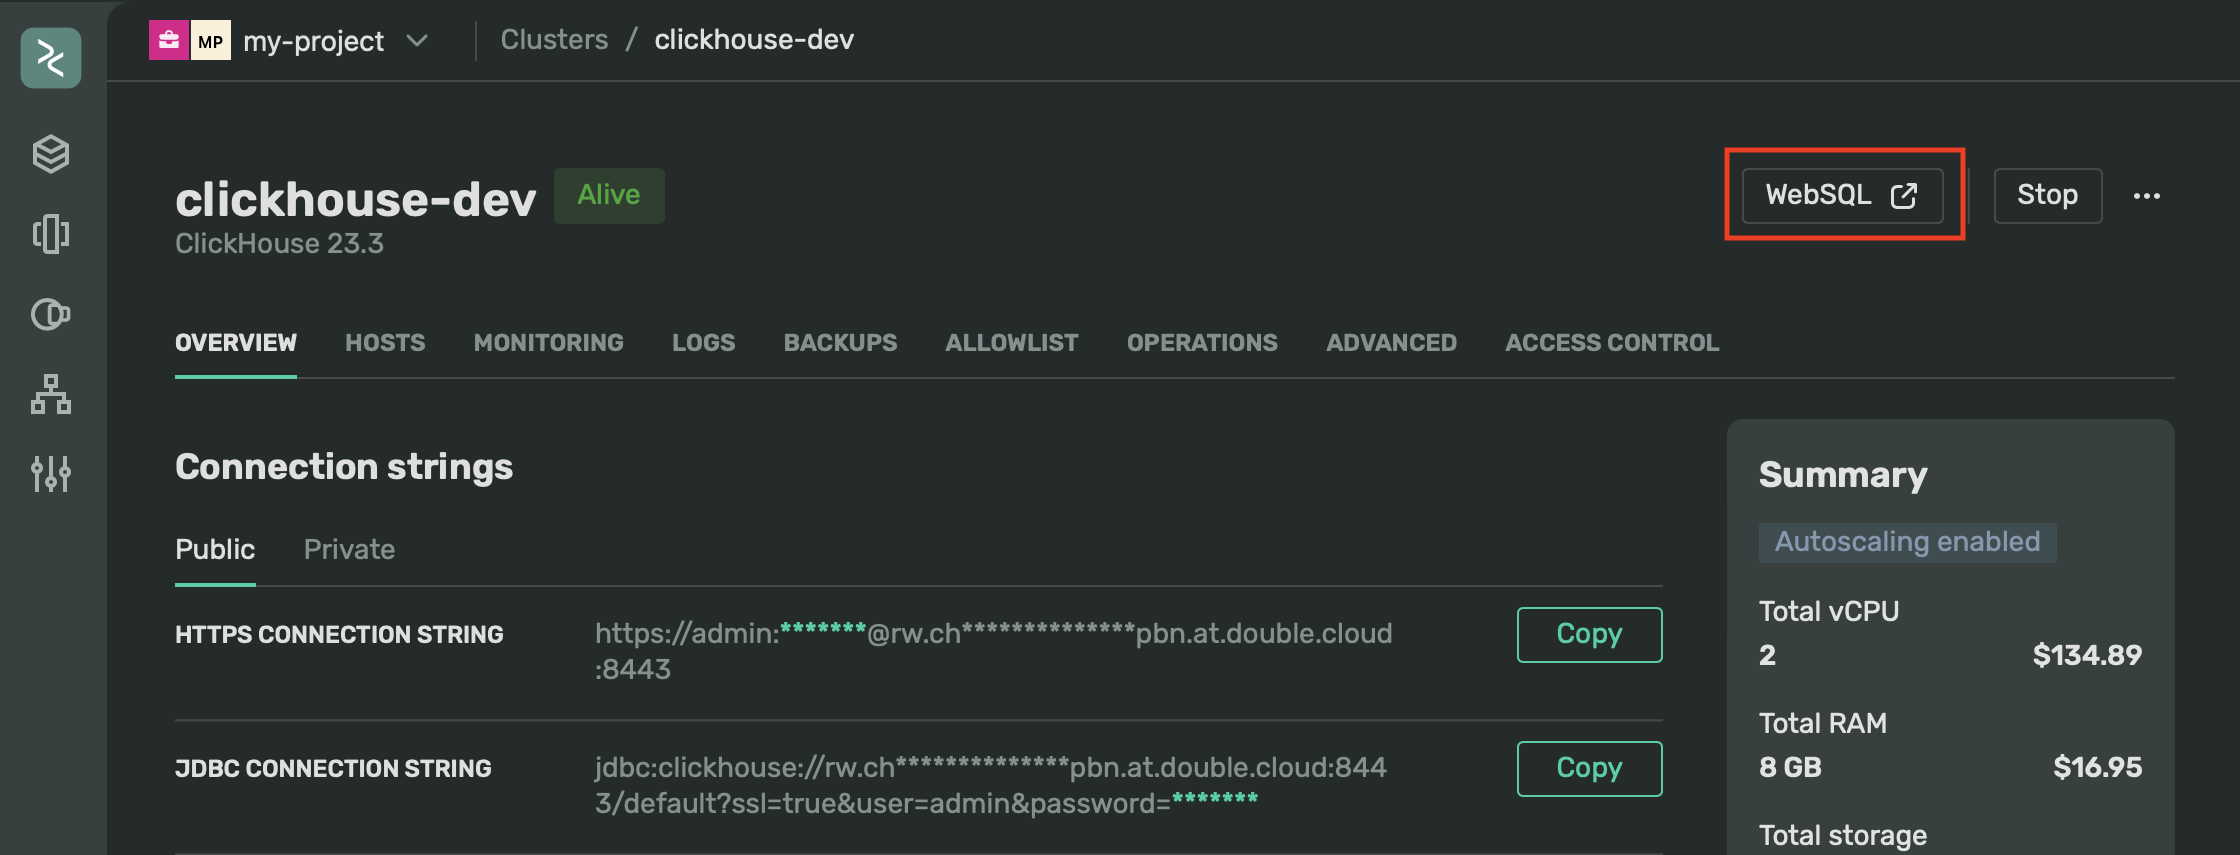 Screenshot of a ClickHouse® cluster page in the DoubleCloud console showing the WebSQL button